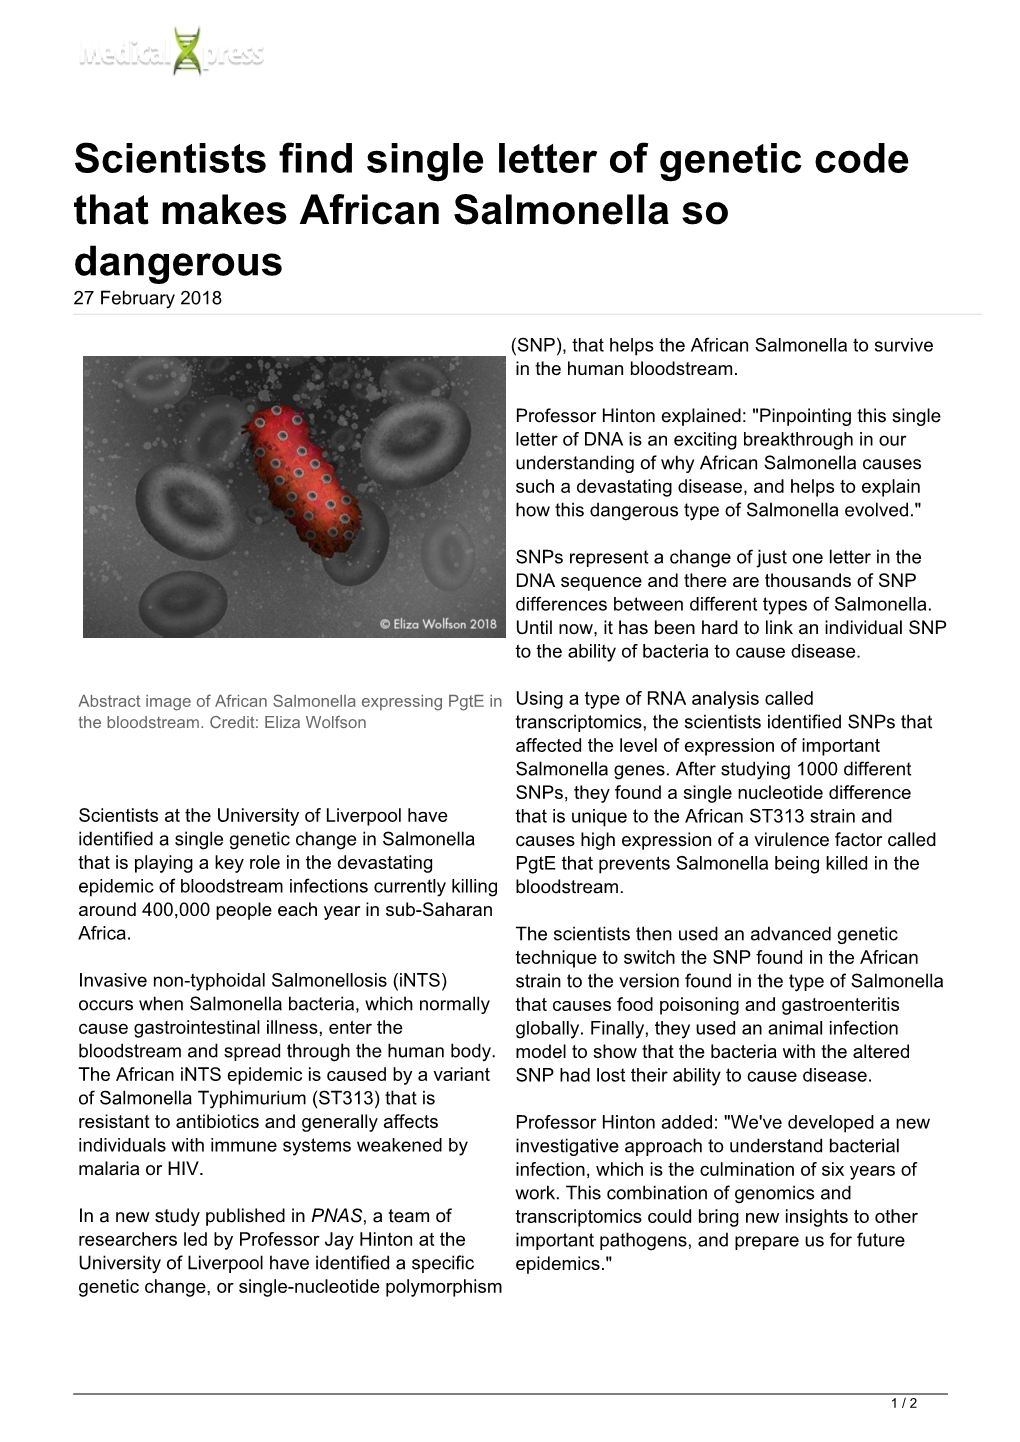 Scientists Find Single Letter of Genetic Code That Makes African Salmonella So Dangerous 27 February 2018